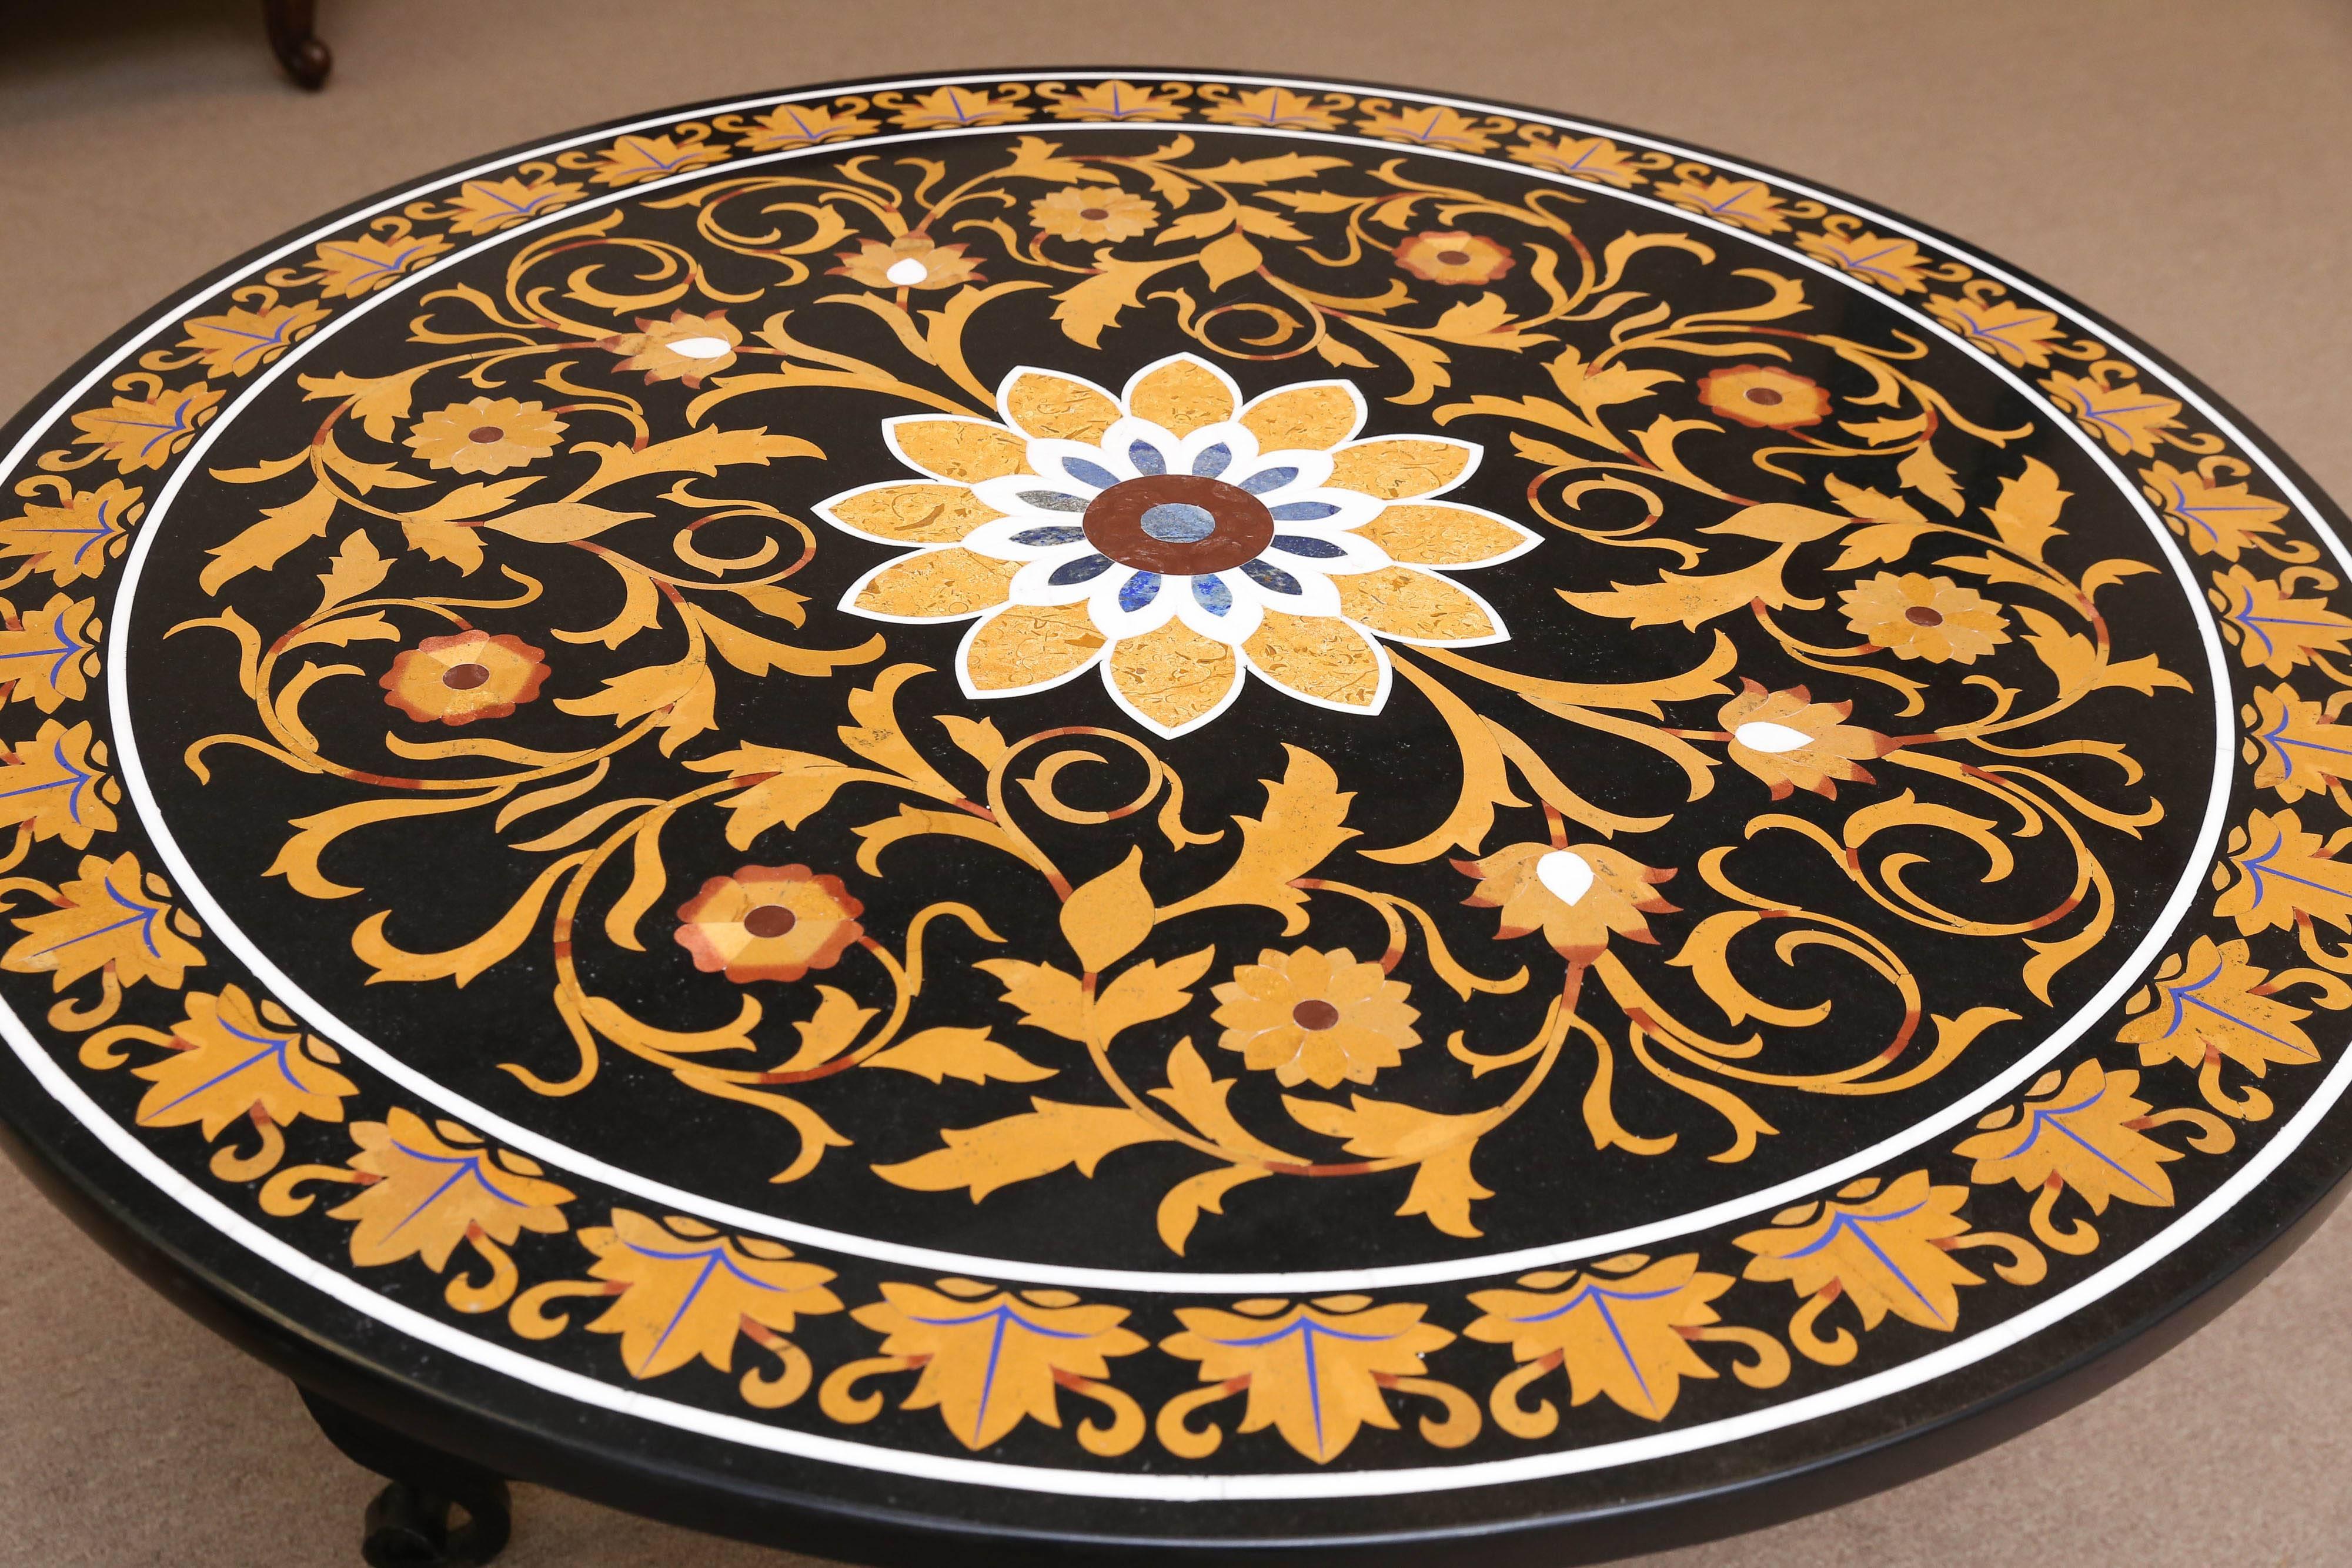 This entry table is exquisitely inlaid with semi-precious stones and other rare marbles. It is practically resistant to scratch. A great table by any standard. A hand-forged solid wrought iron base support the inlaid tabletop. It is a great entry